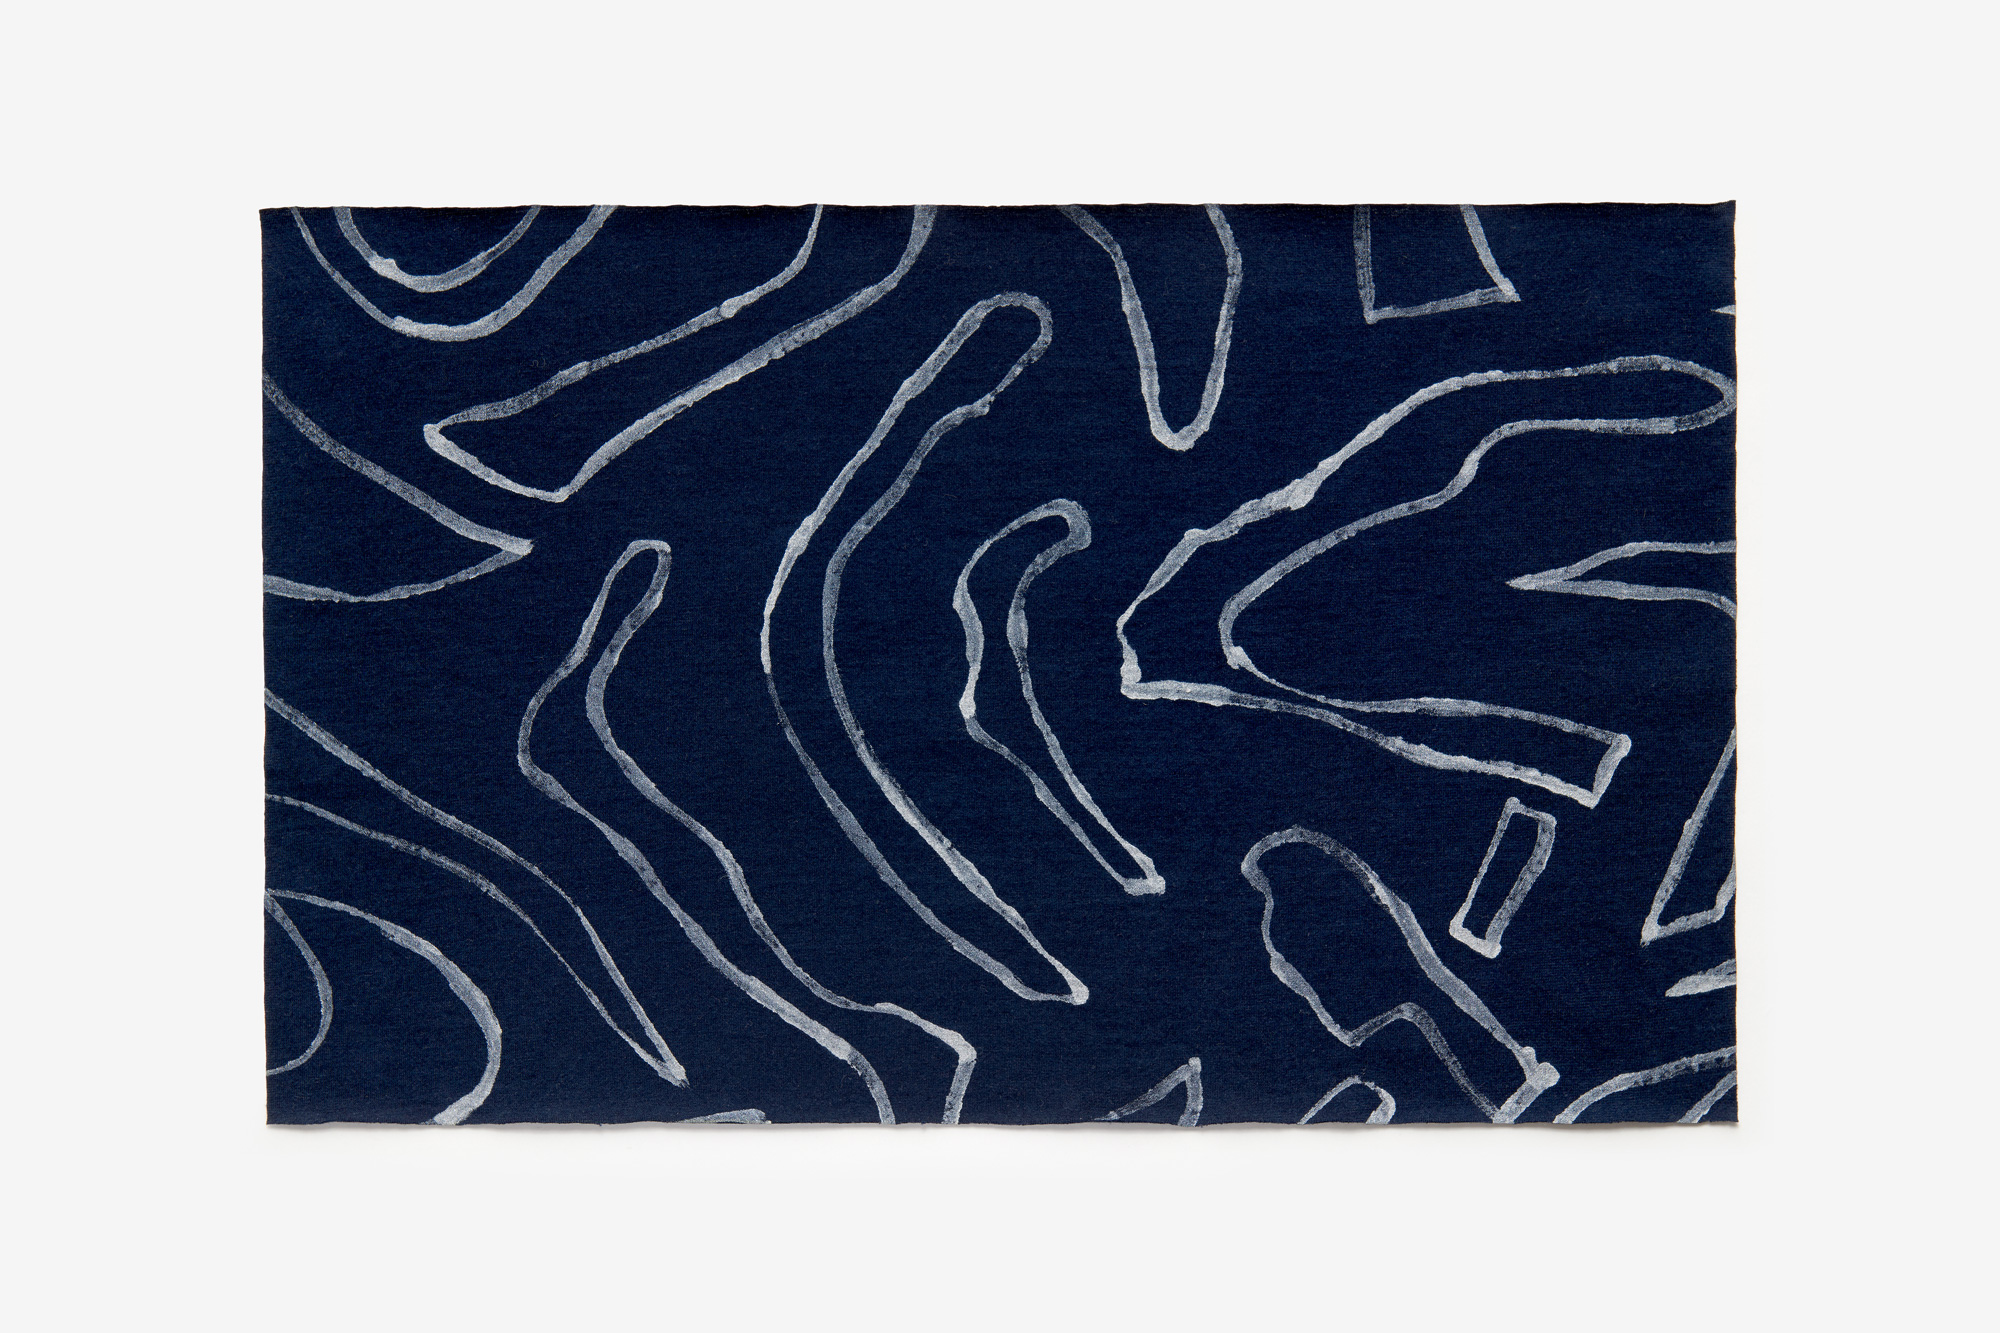 Fabric swatch featuring the hand-painted figures design on Navy.